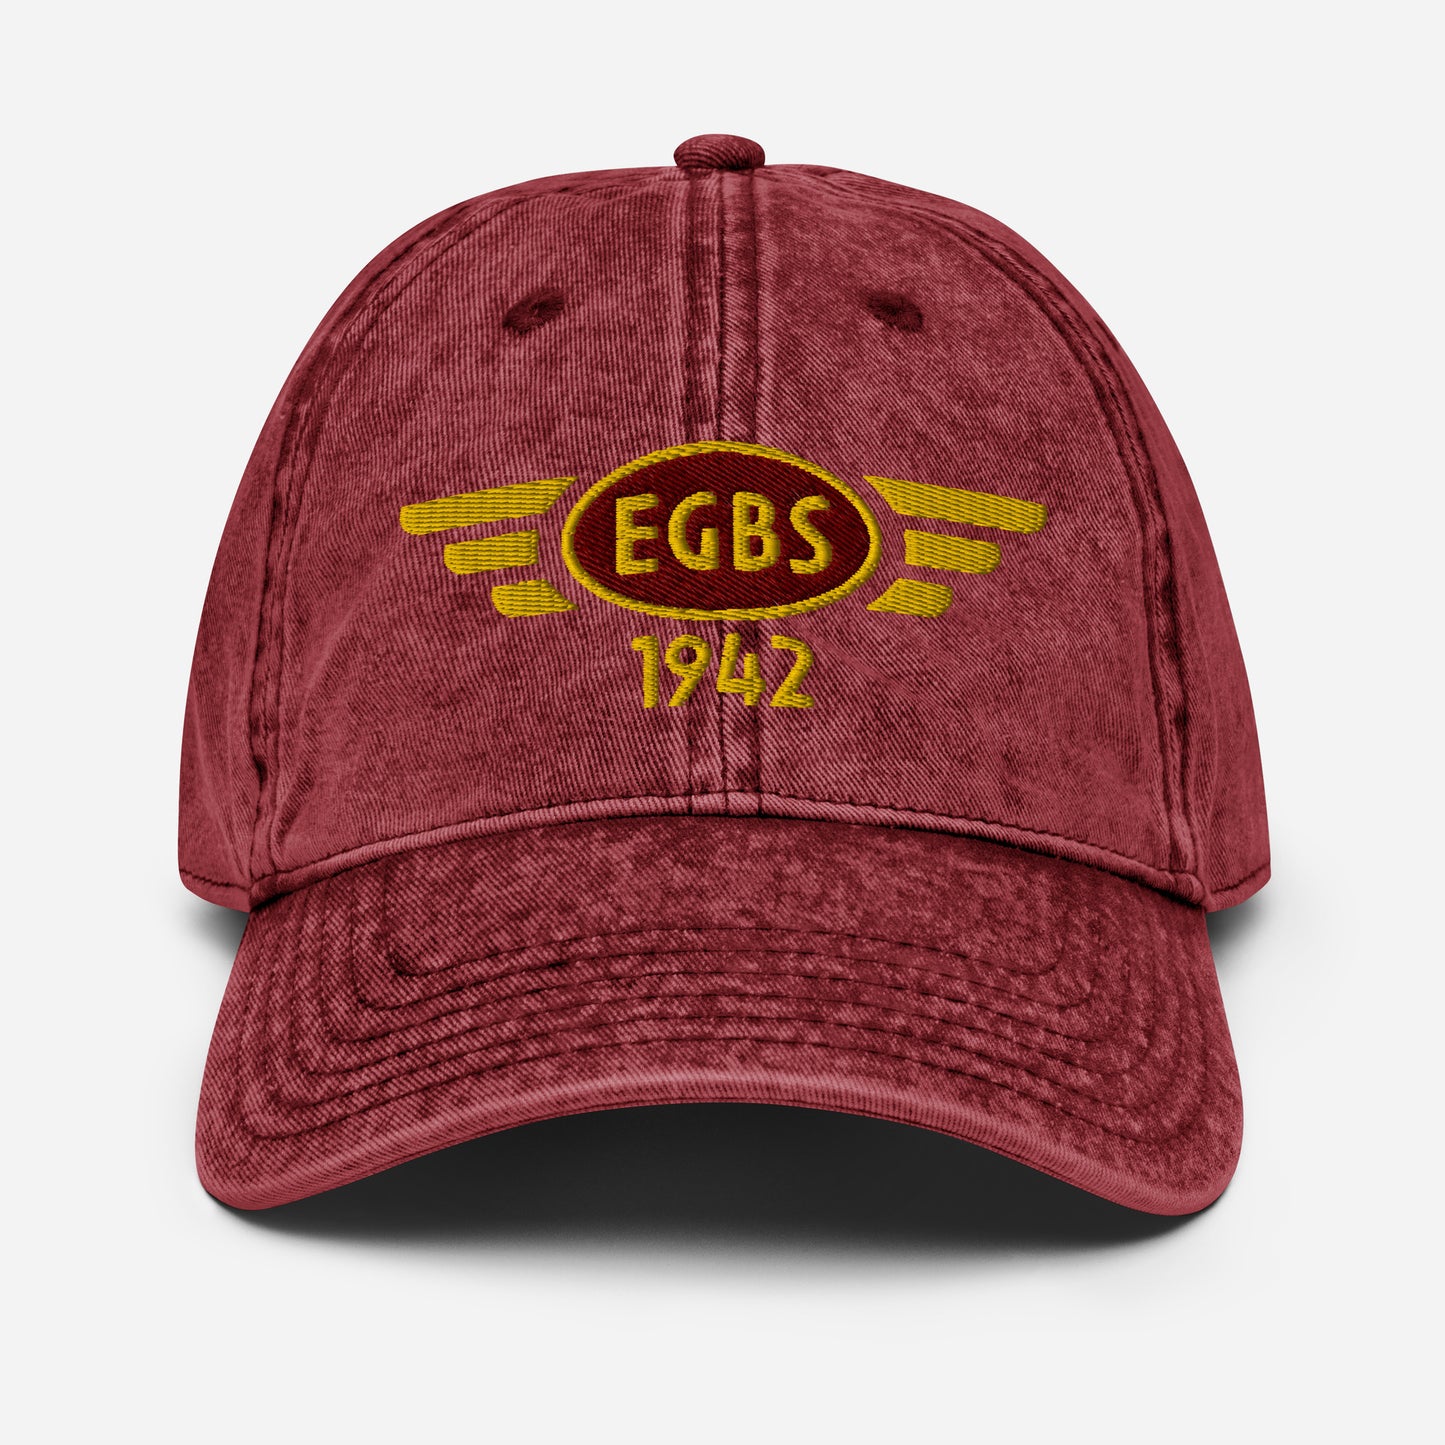 Shobdon Airfield vintage cotton twill baseball cap with embroidered ICAO code.